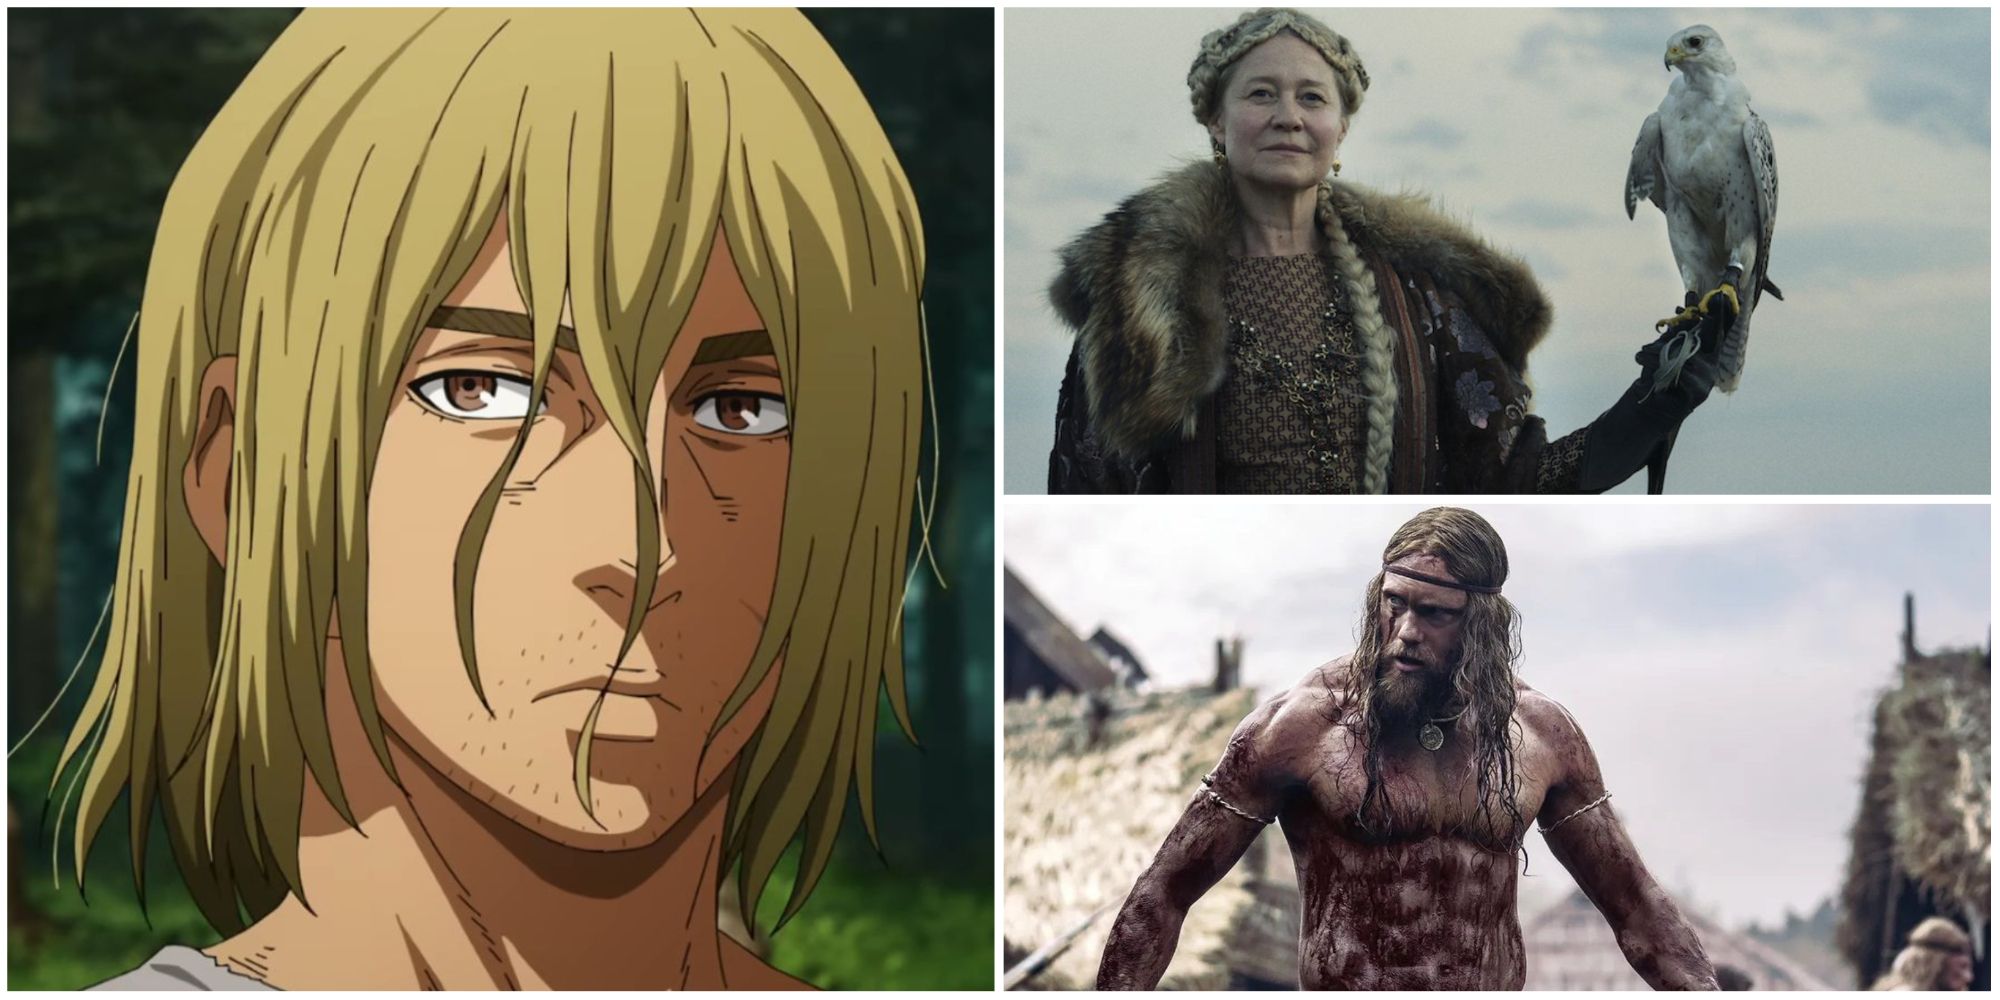 Vinland Saga Best Movies To Watch If You Like The Animes Time Period